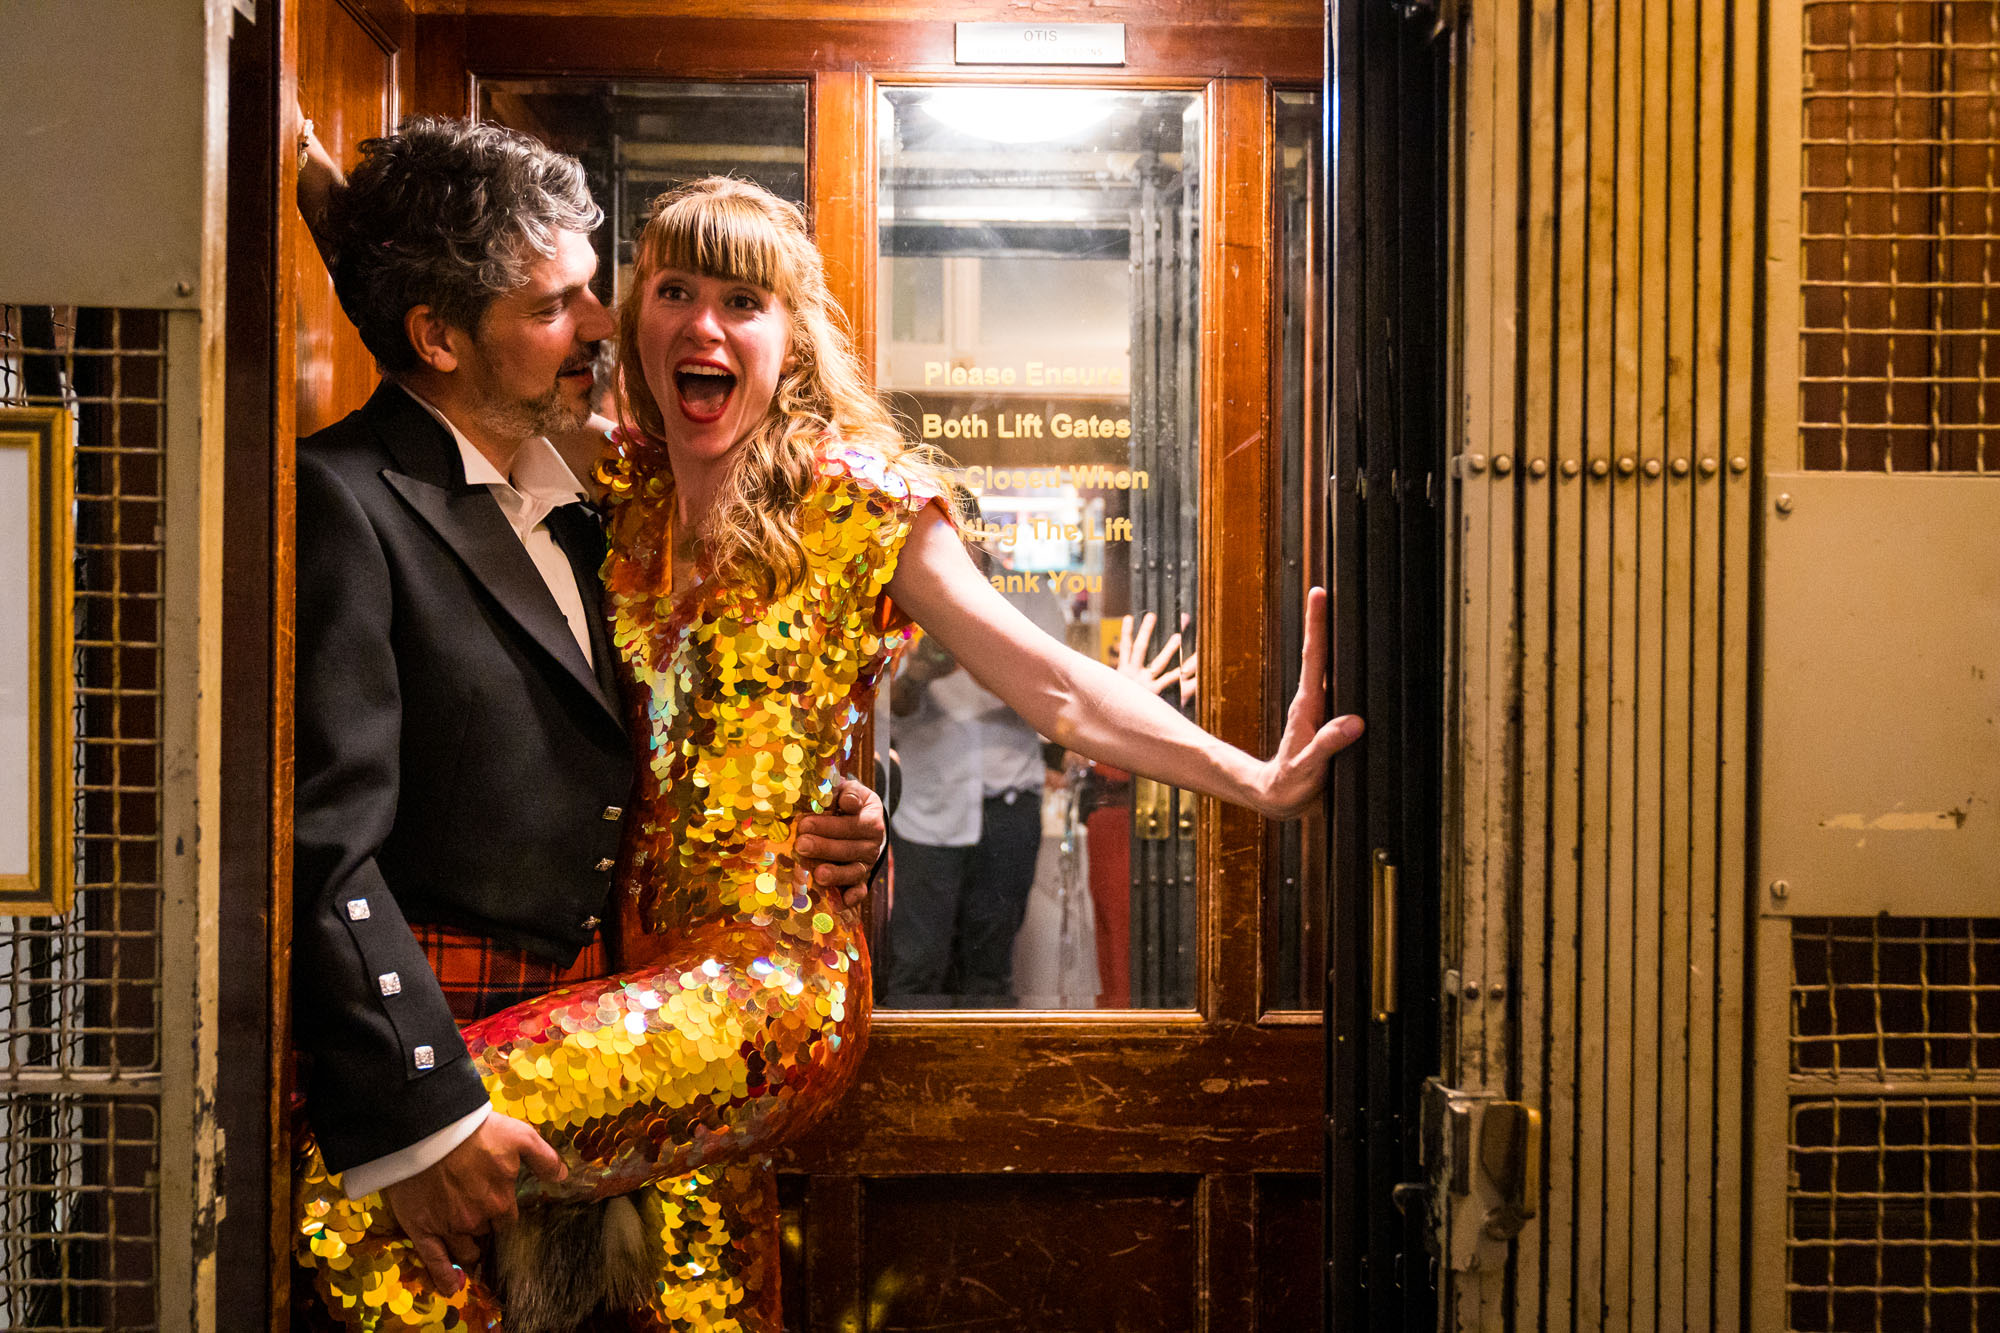 Alternative wedding evening do with a sparkly sequin jumpsuit - photographer credit Benjamin Toms based in Canterbury Kent